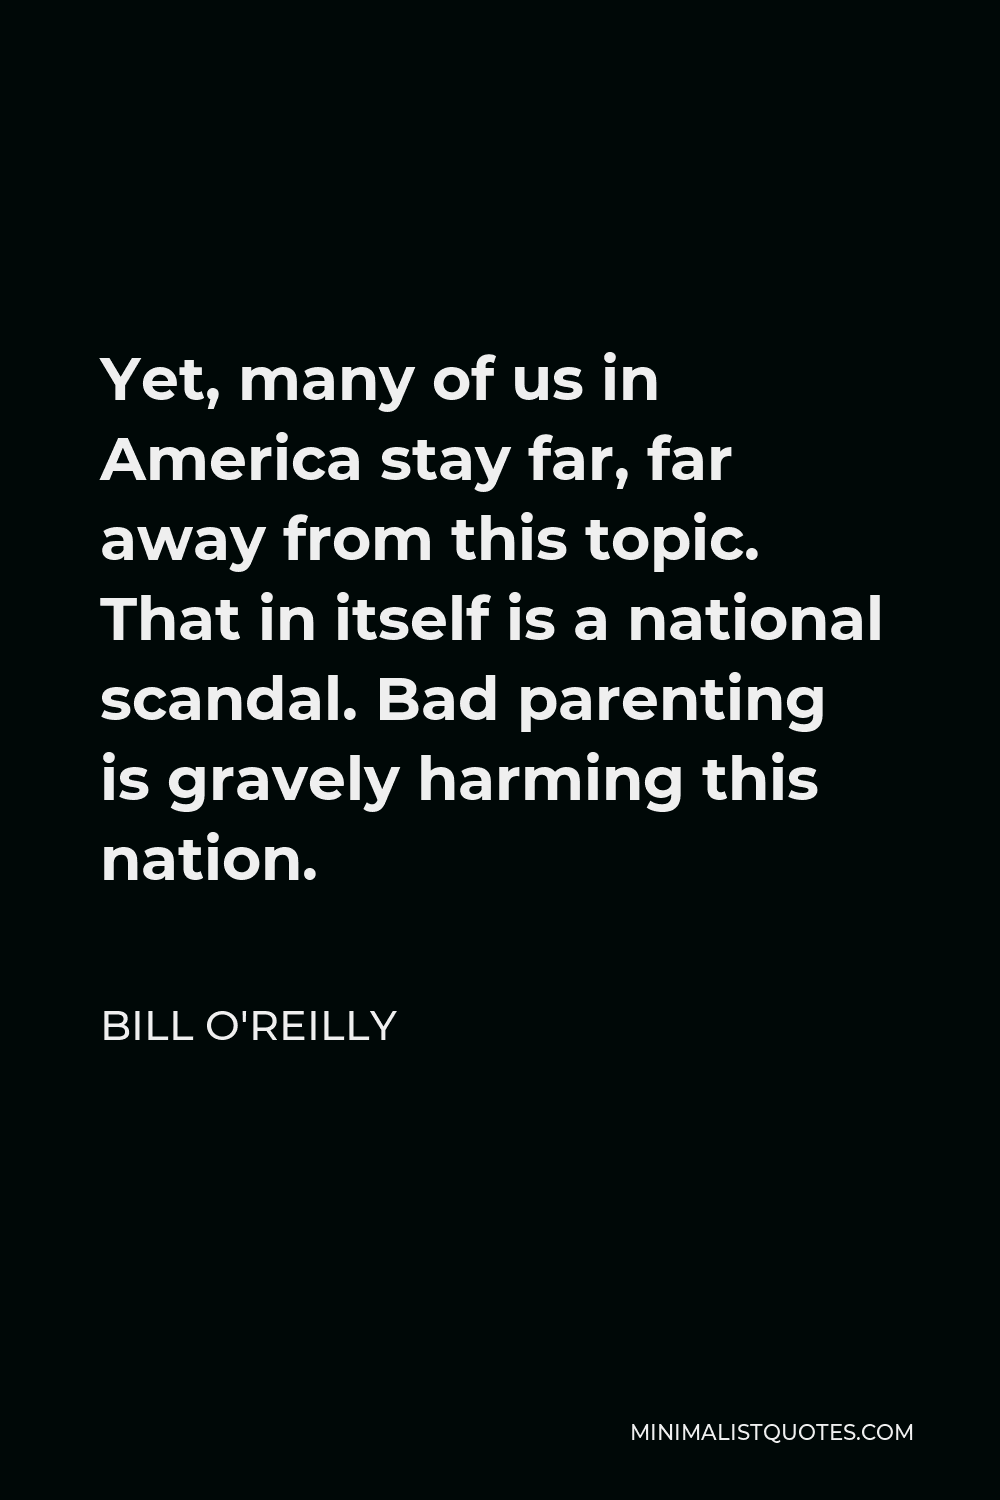 Bill O'Reilly Quote - Yet, many of us in America stay far, far away from this topic. That in itself is a national scandal. Bad parenting is gravely harming this nation.